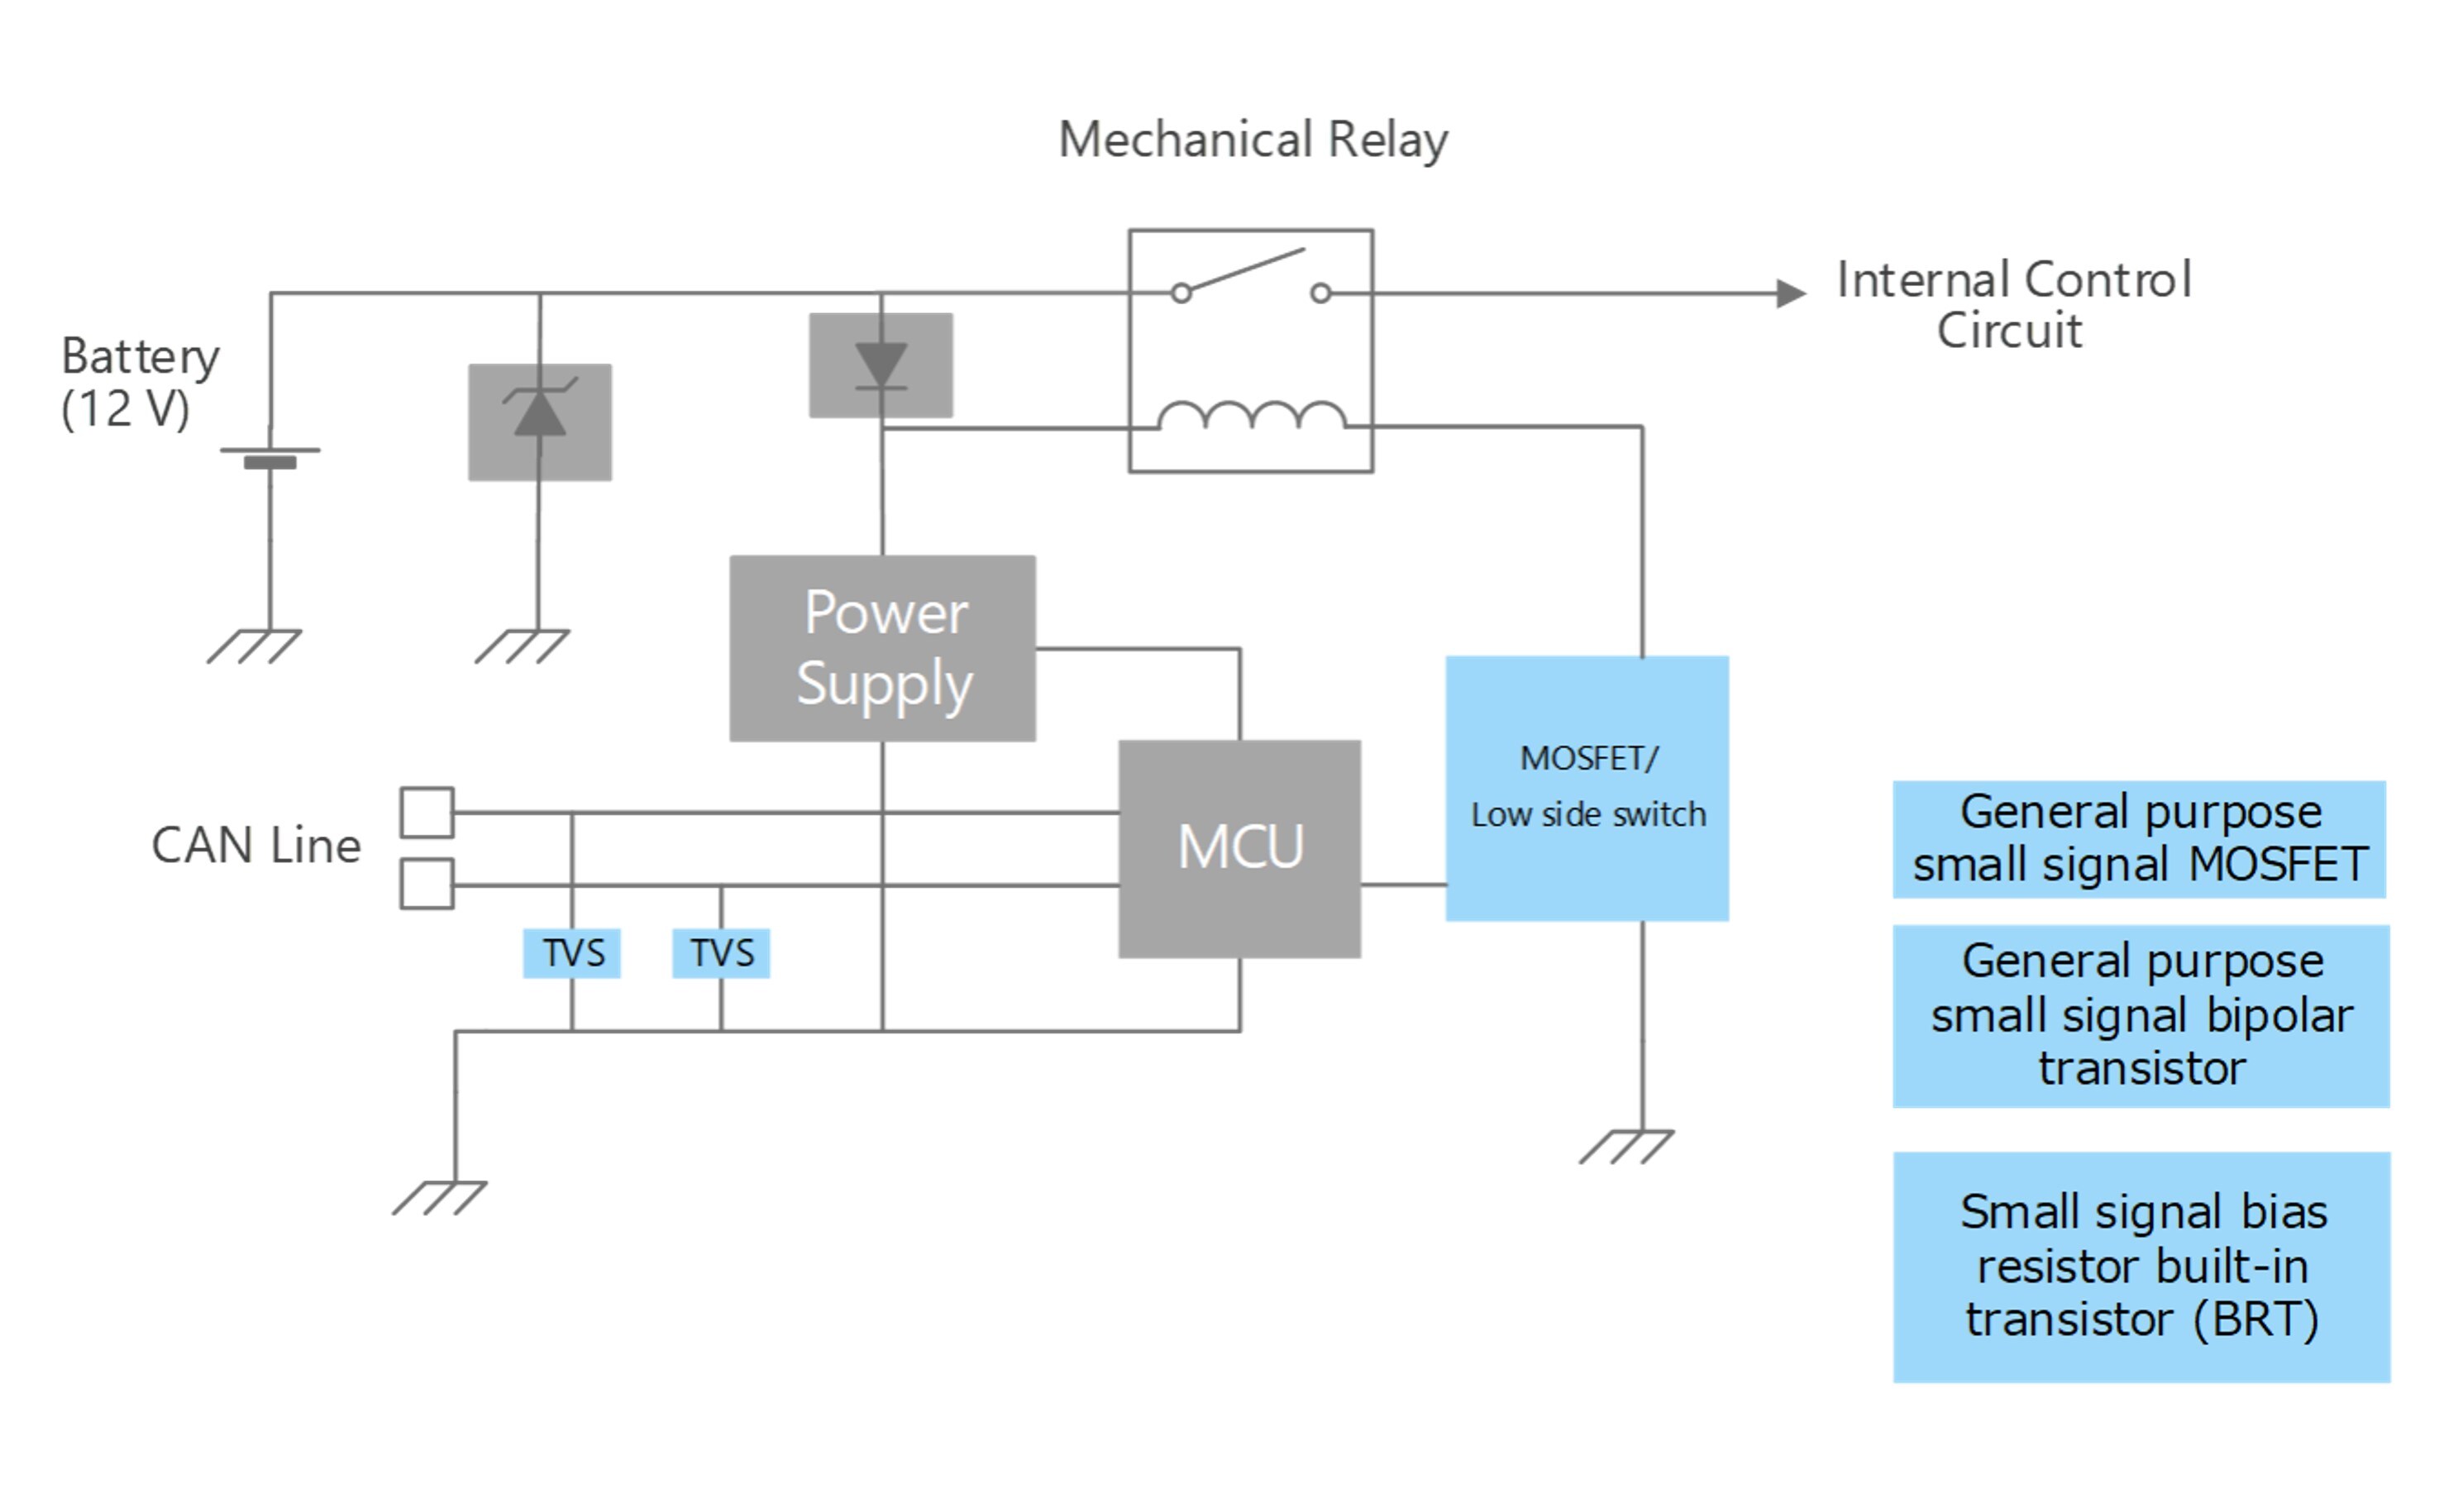 Mechanical relay system